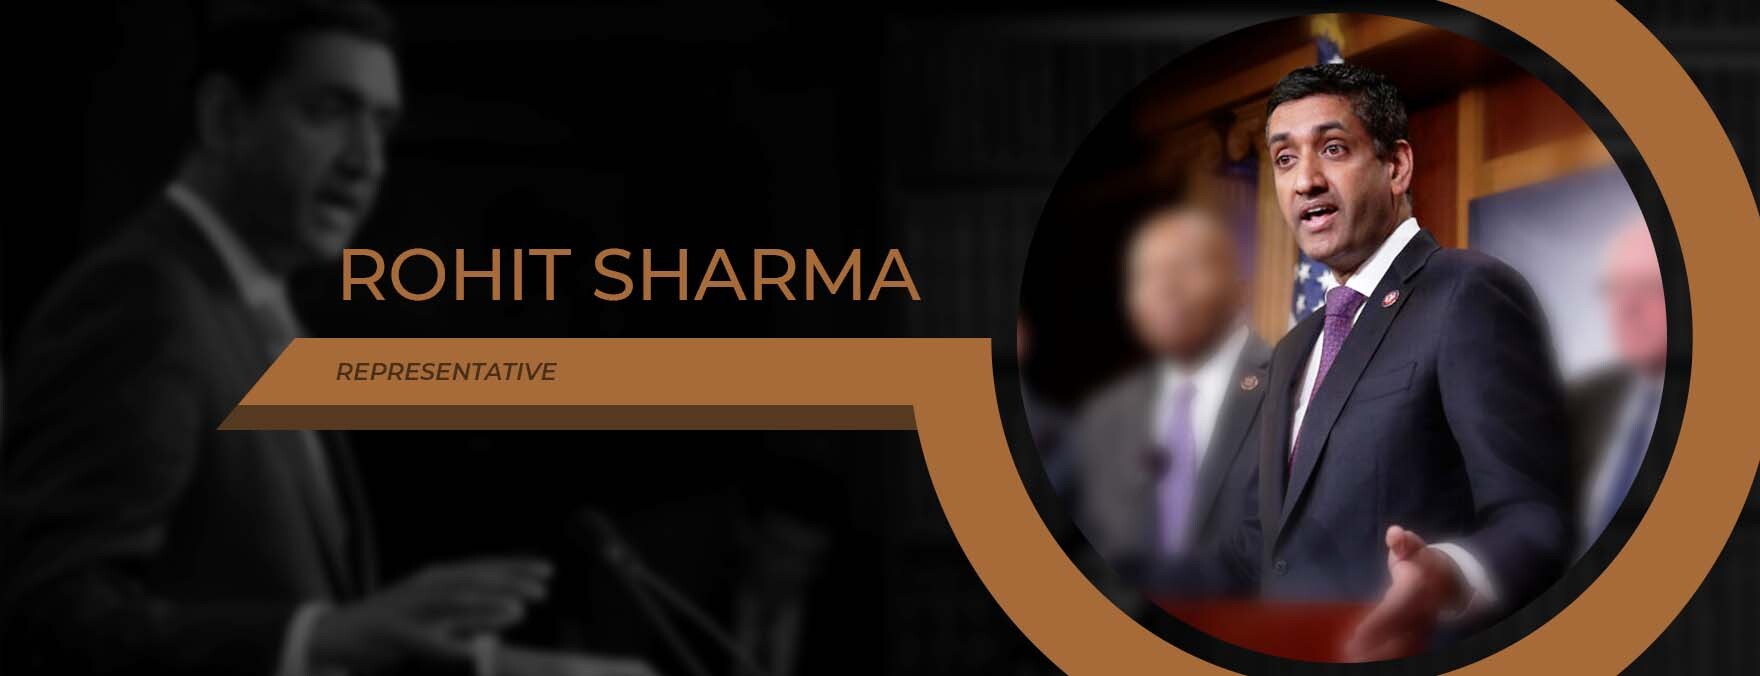 Representative Rohit Sharma's image is displayed in a cirle shape with a blur background, and his name is displayed alongside his image.